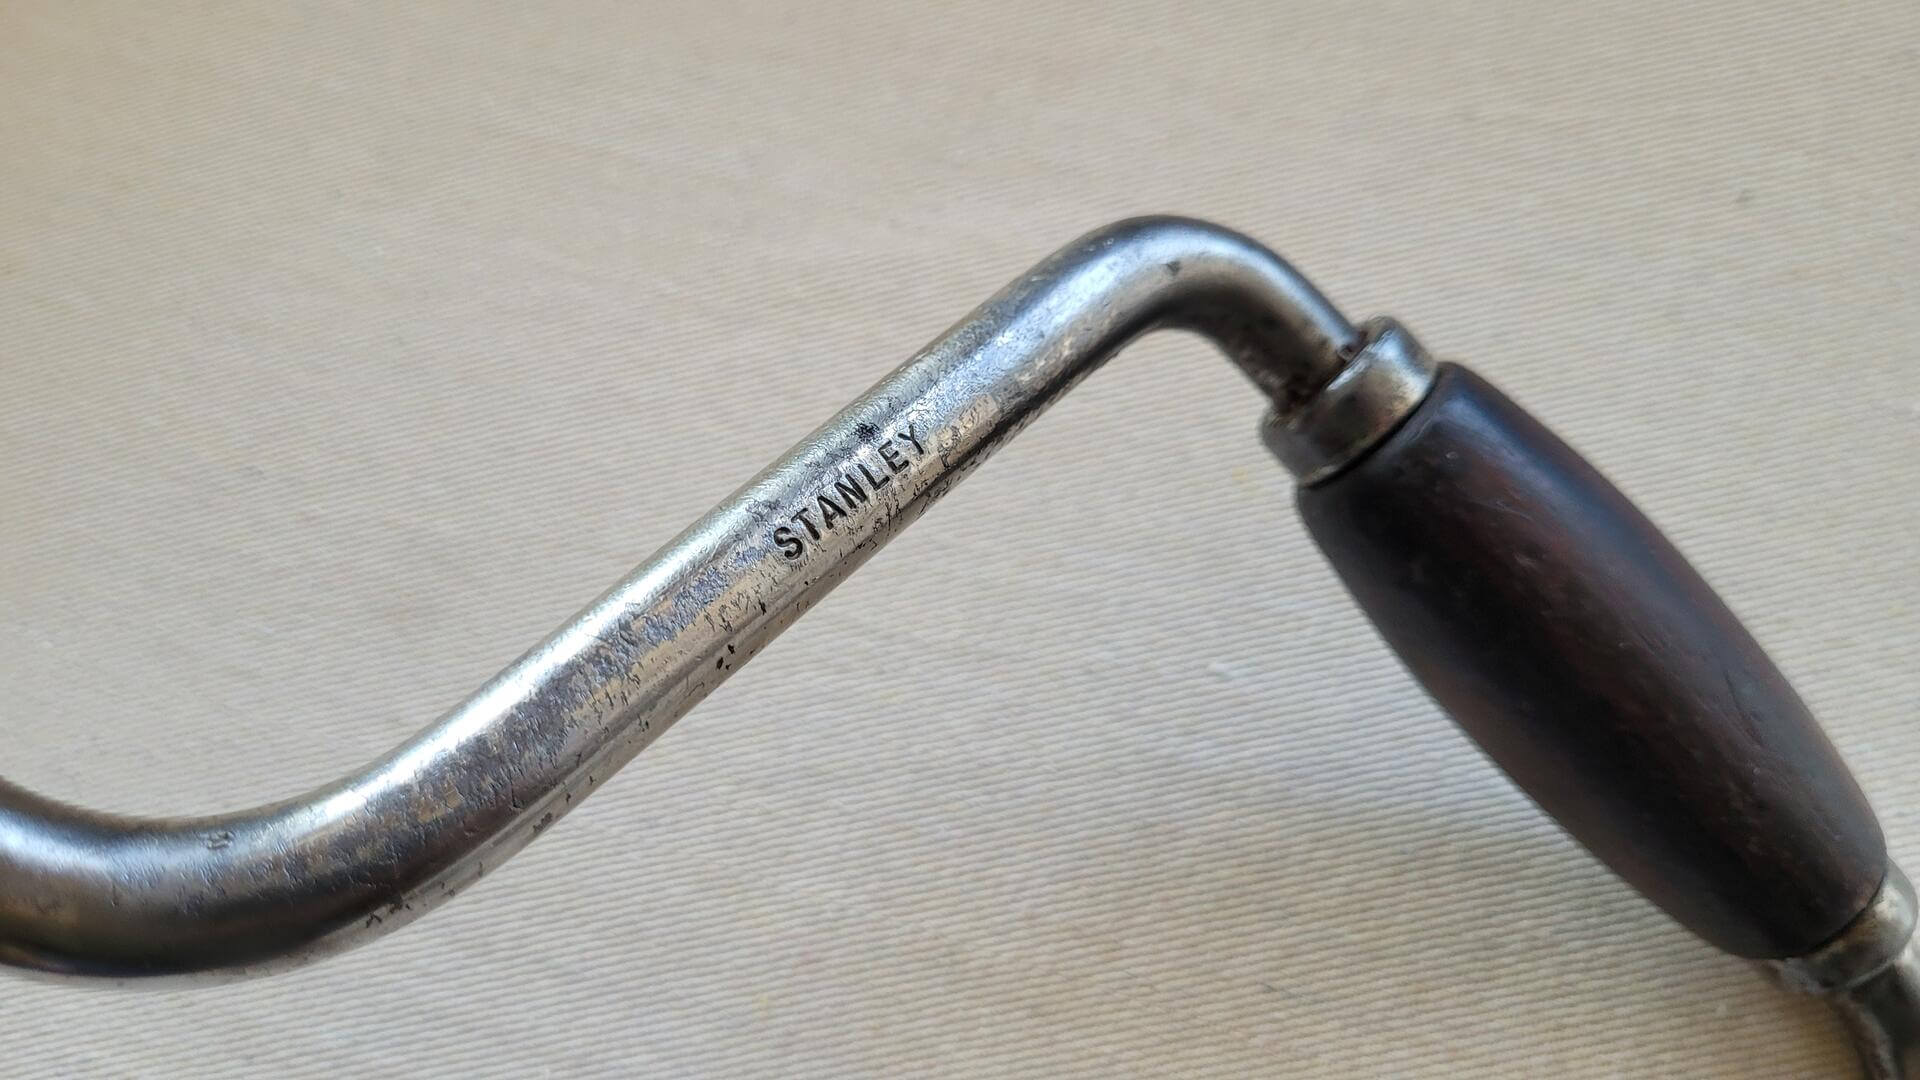 Vintage Stanley No. 923-10 ratcheting reversible auger bit brace hand drill. Antique made in Canada collectible carpentry, woodworking & cabinet maker tools